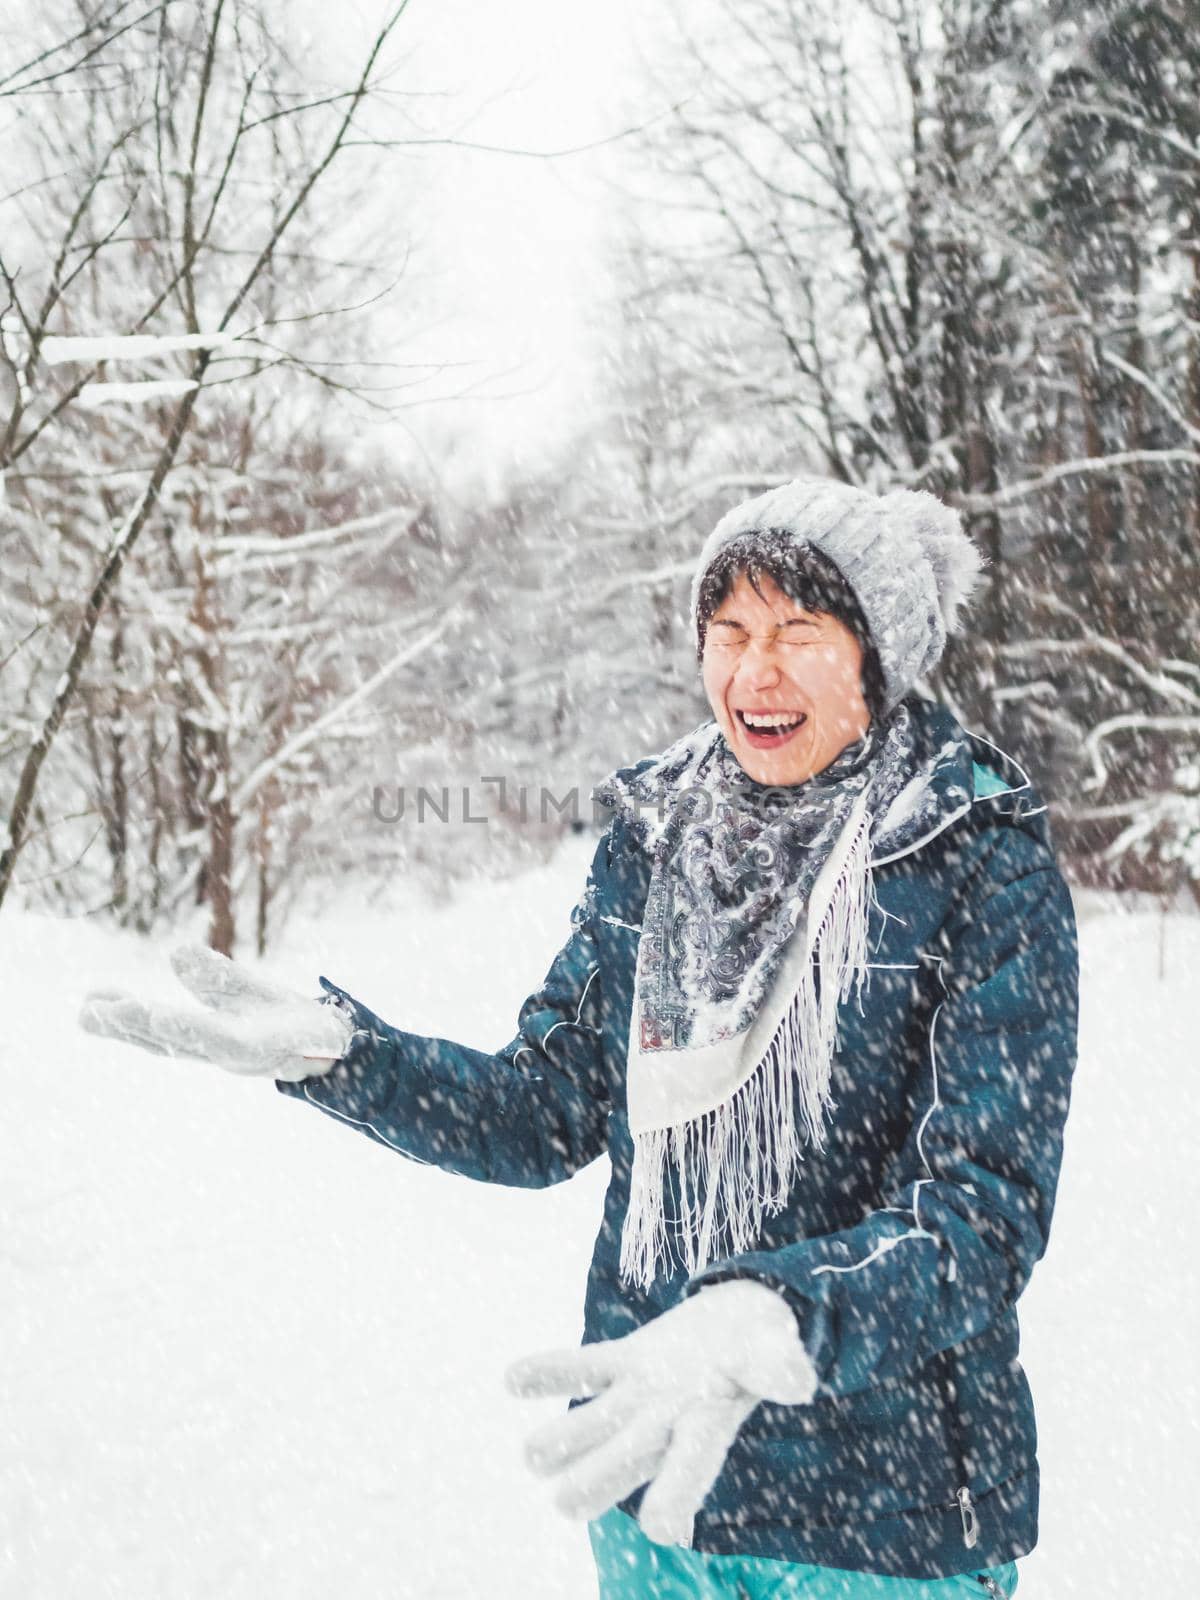 Smiling woman is playing with snow. Fun in snowy winter forest. Woman laughs as she walks through wood. Sincere emotions.